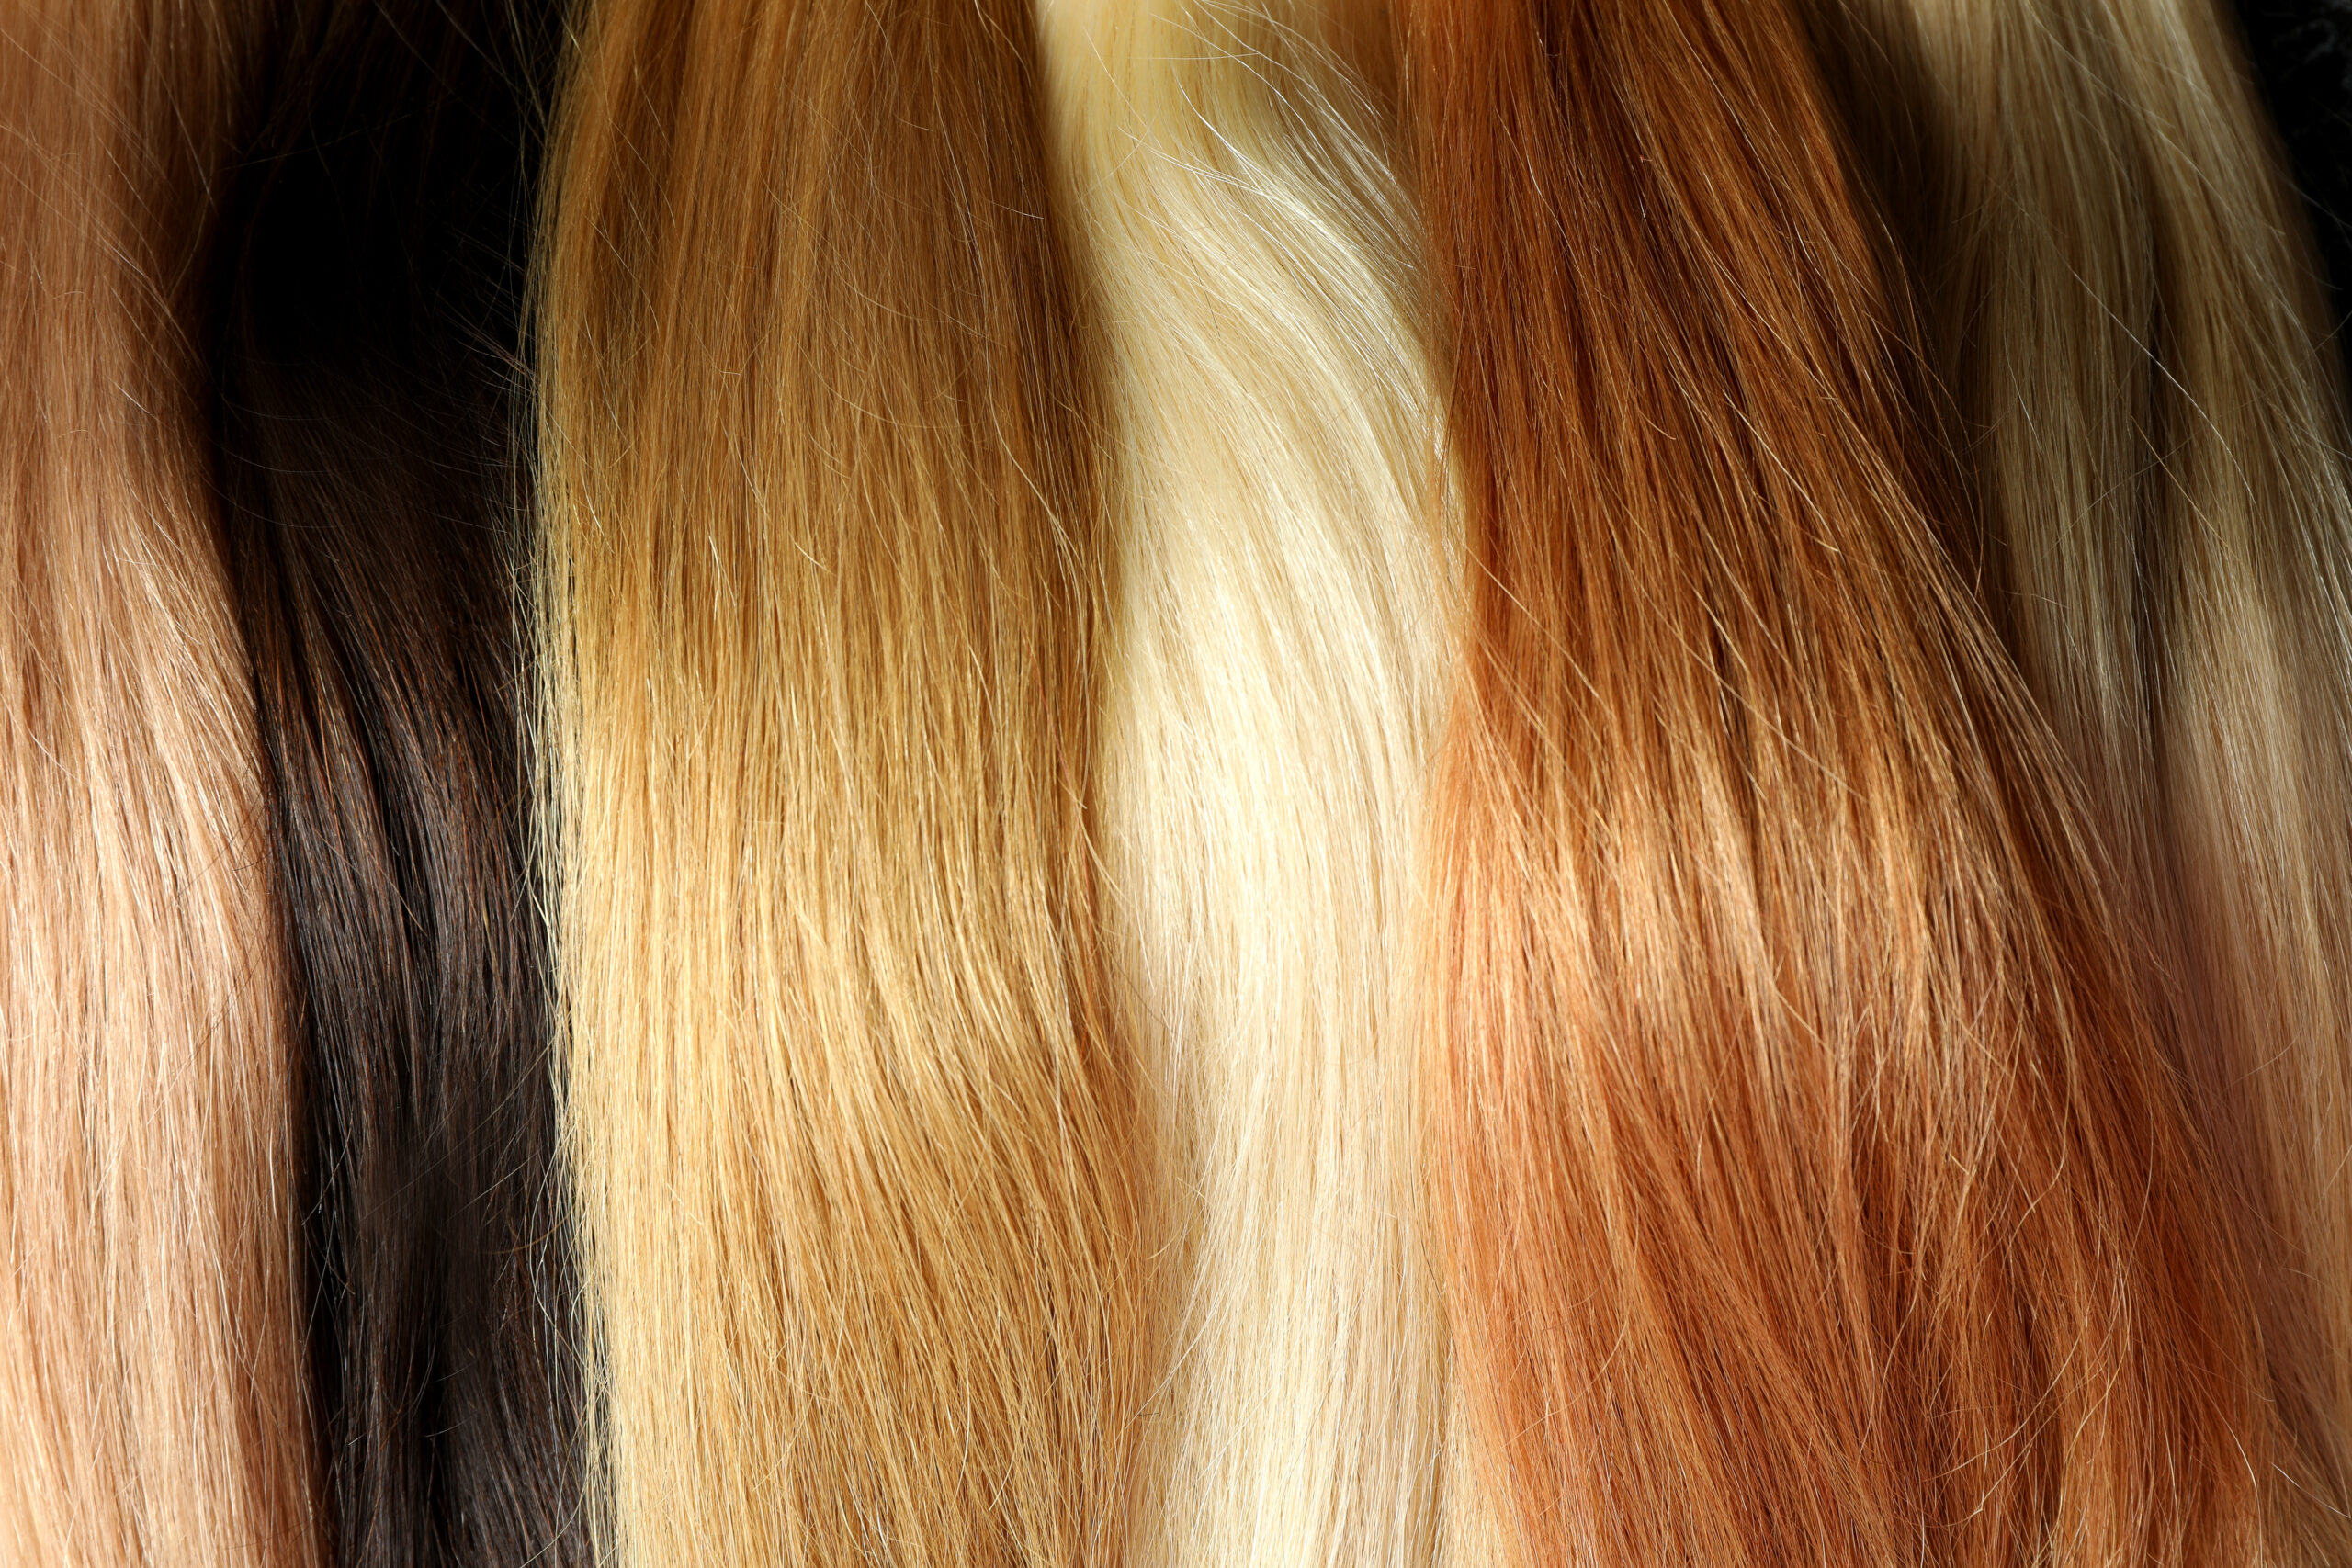 How to Promote Hair Extension Services for Non-Surgical Hair Replacement